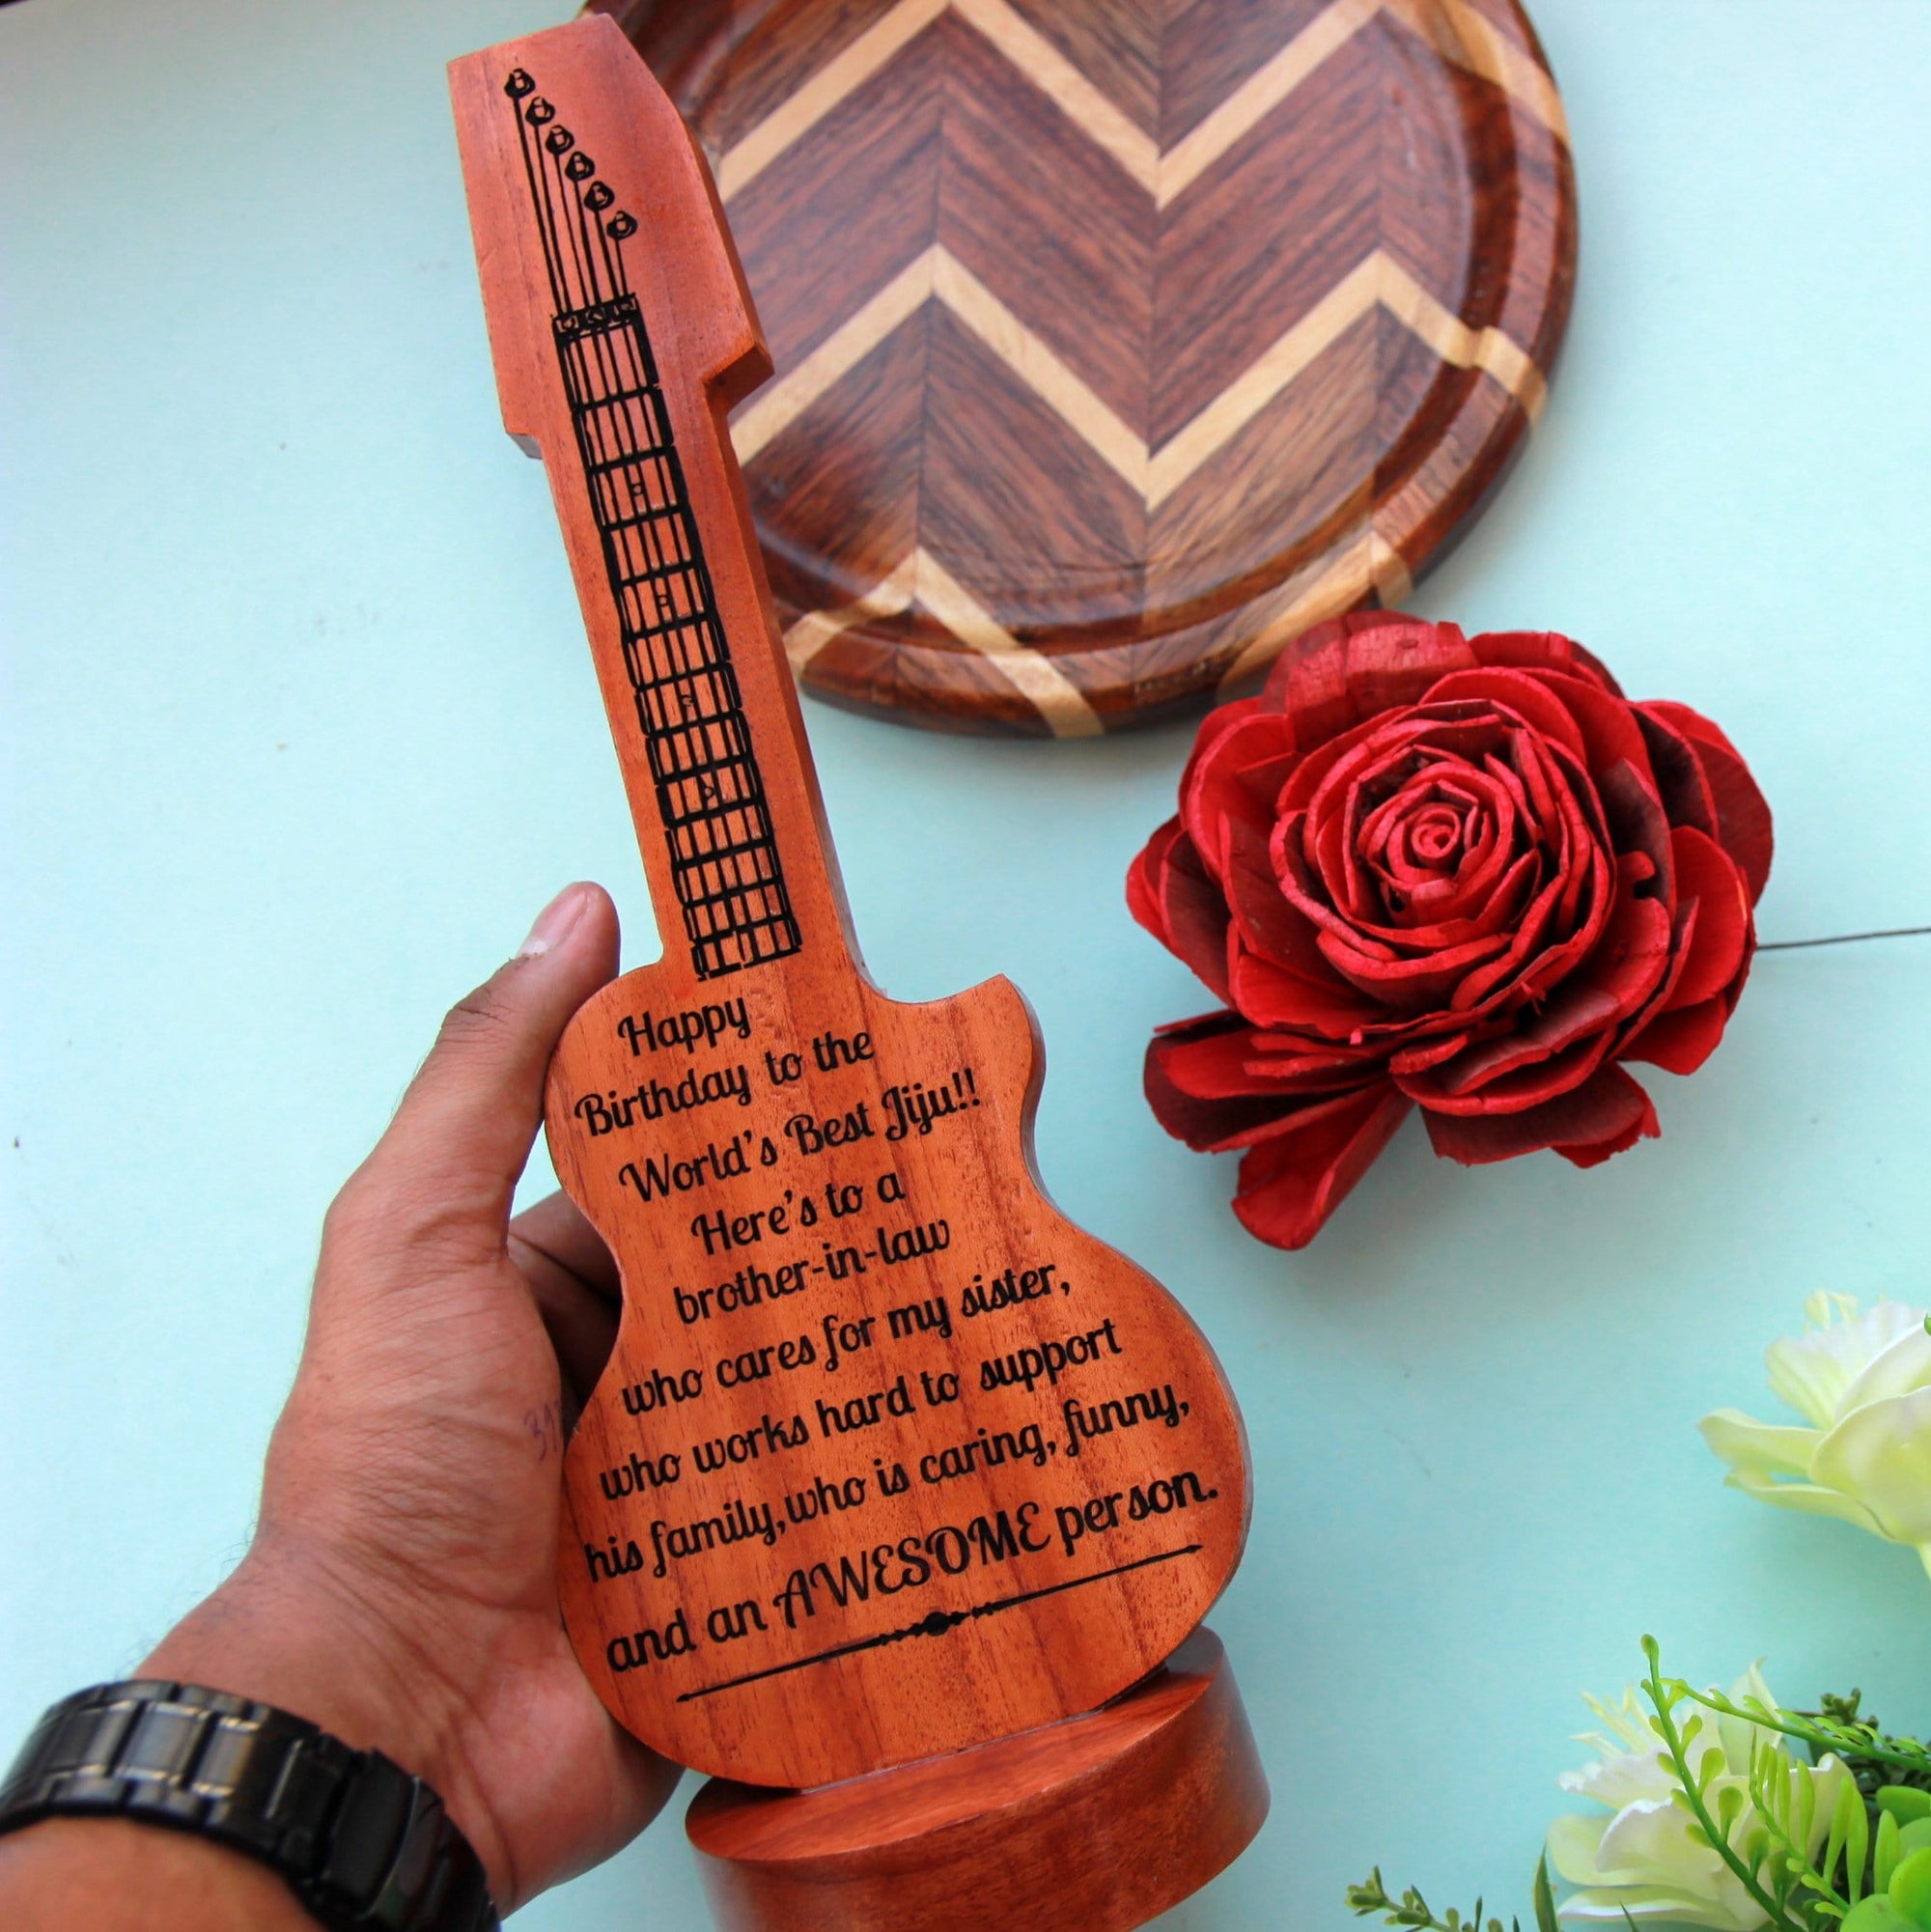 Gifts For Brother-In-Law. This Wooden Plaque Engraved With A Birthday Message Is The Best Birthday Gift For Brother. Looking for gifts for brother? This Birthday Greetings Engraved On This Wooden Award Plaque Is A Great Personalized Gift.